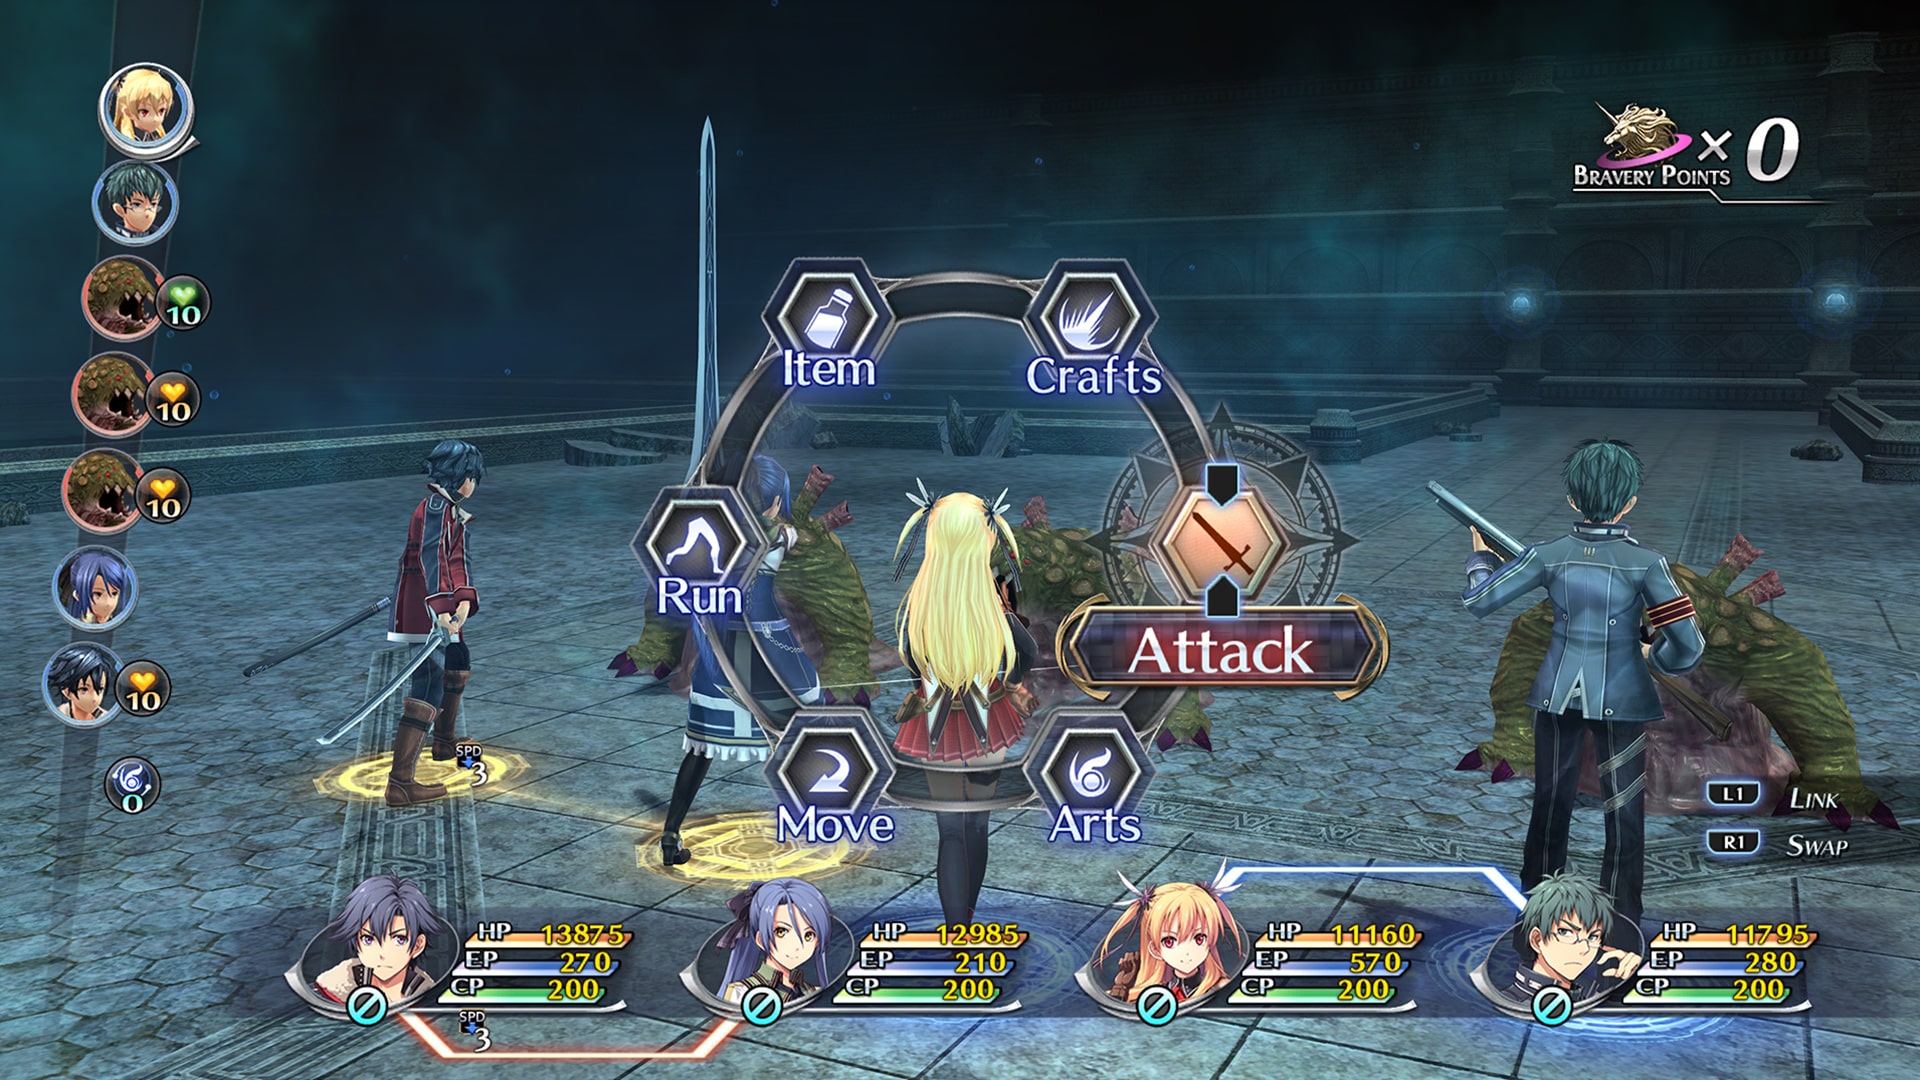 trails of cold steel 2 ps4